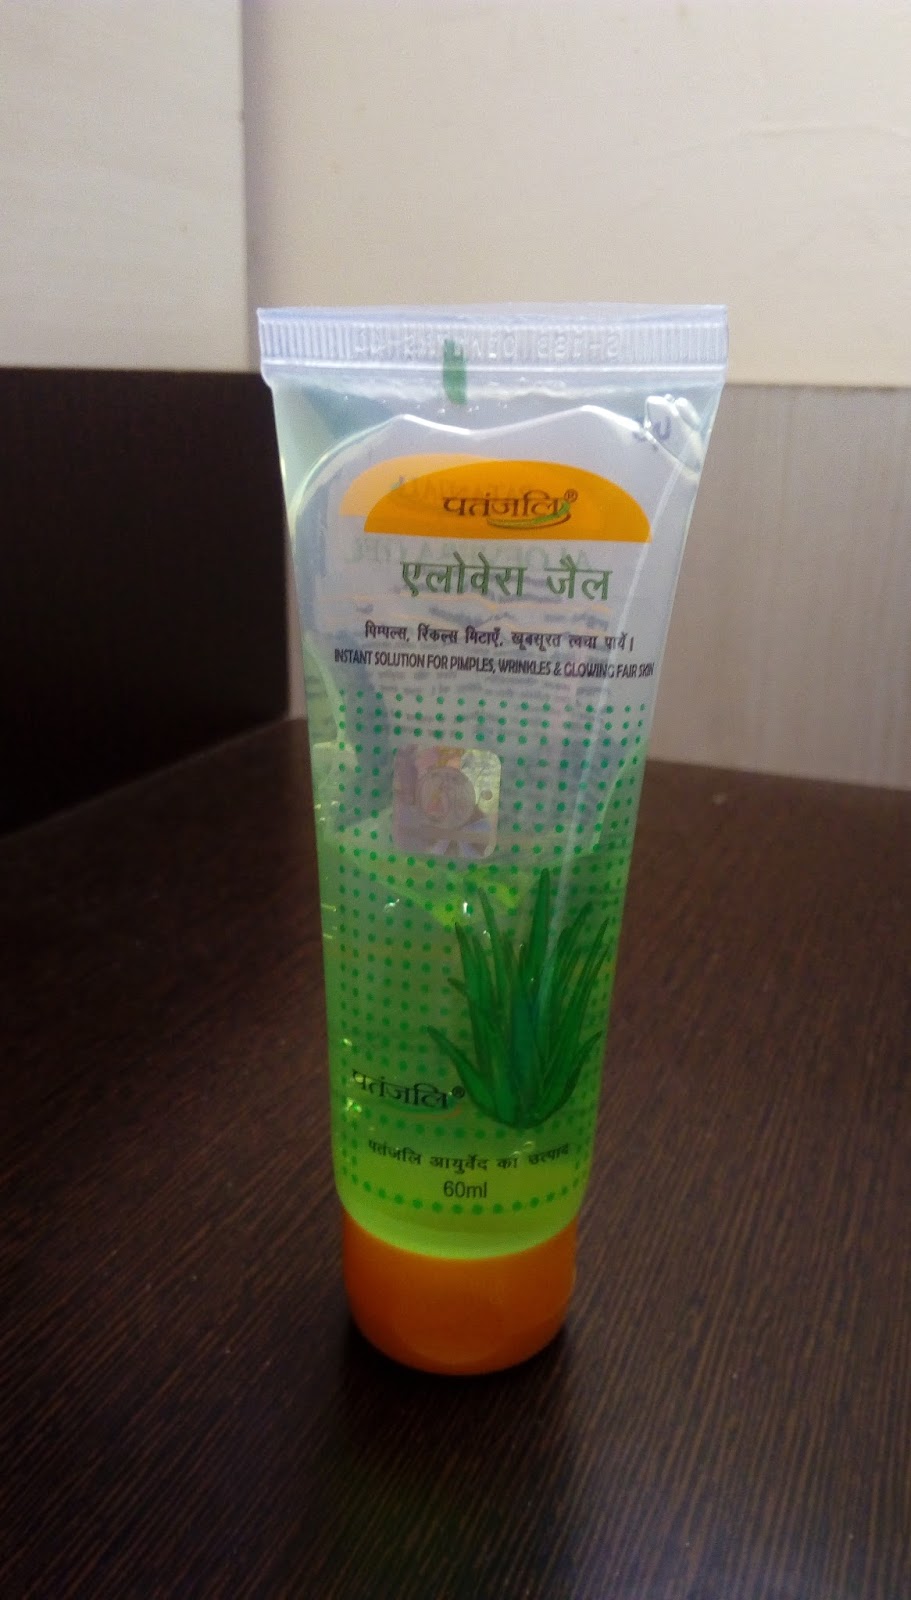 Patanjali Aloe Vera Gel Review - My Review Hall